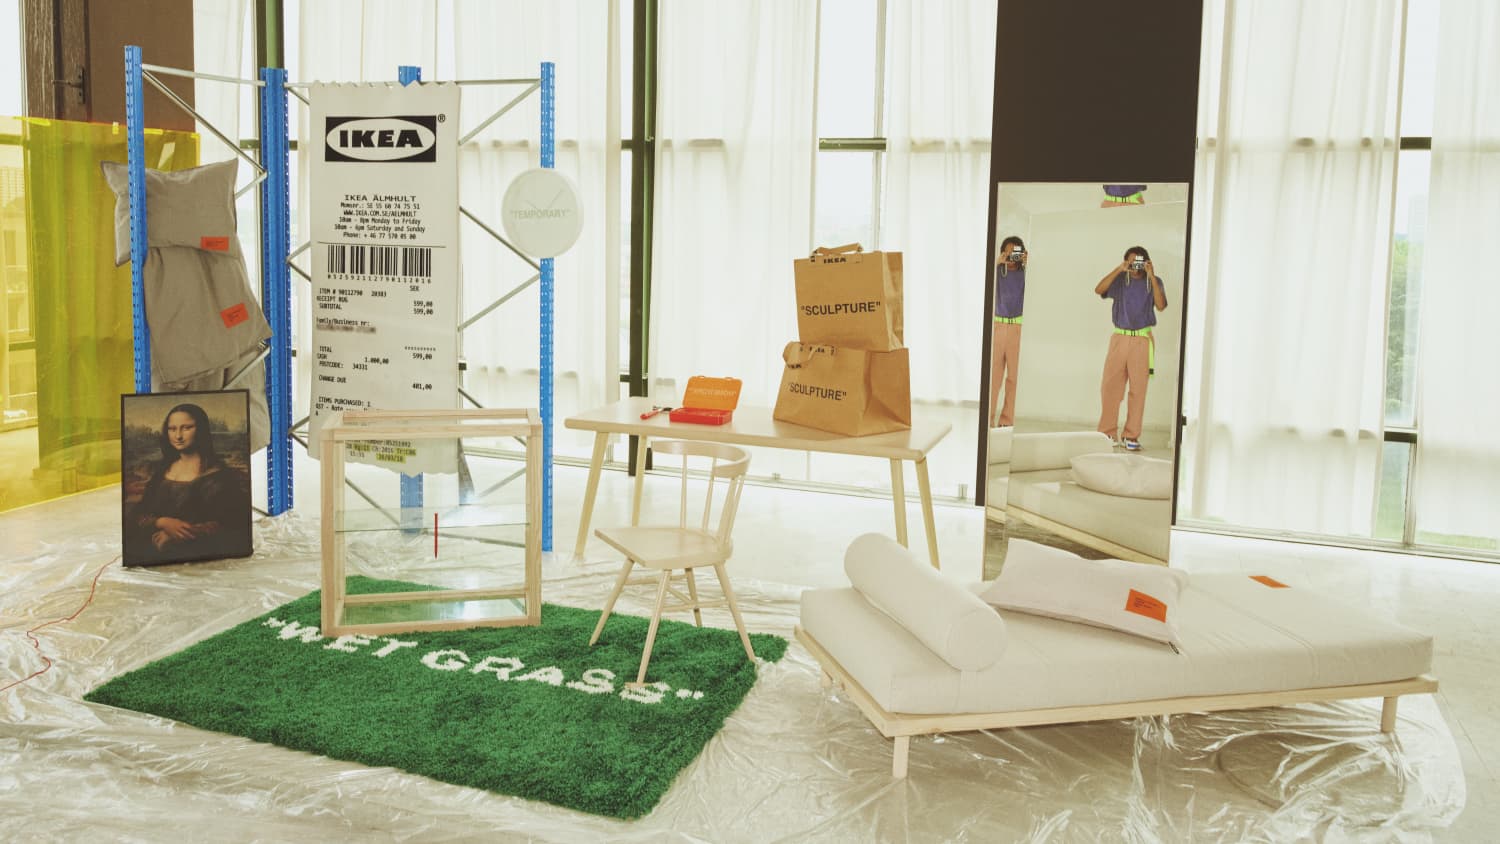 Virgil Abloh's IKEA Collab Made for Absolute Madness